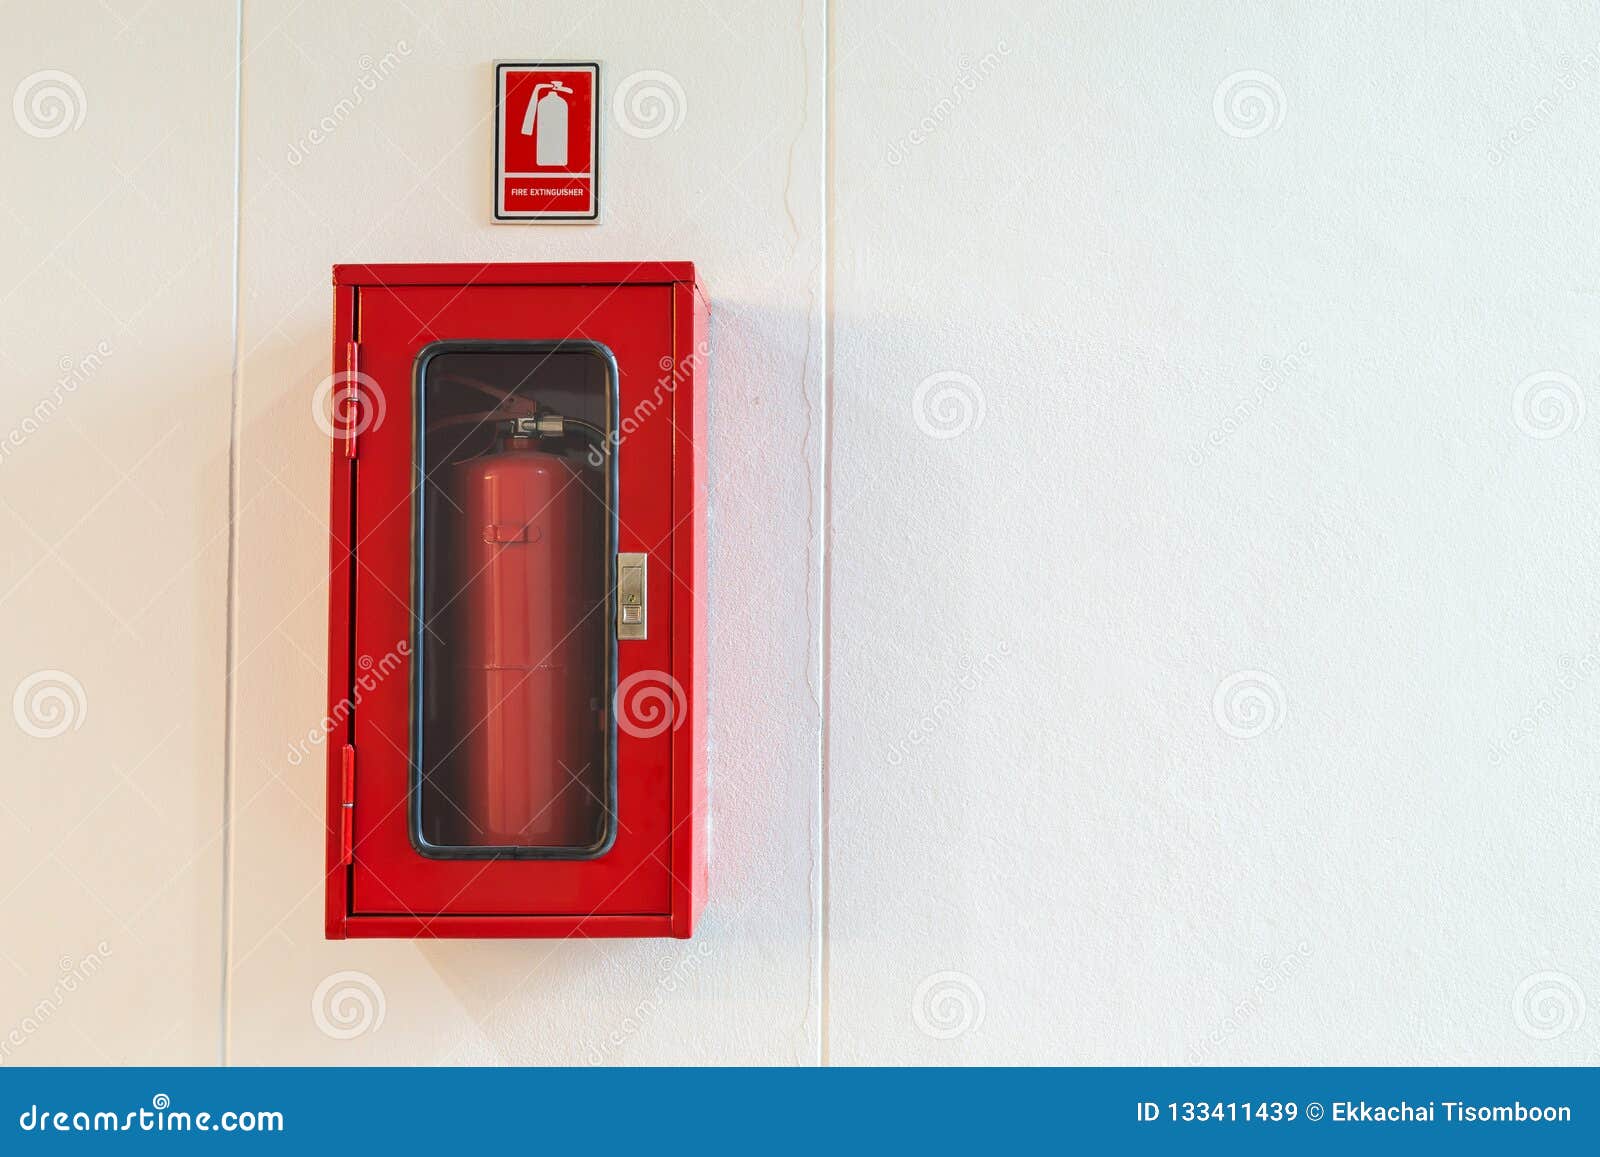 Fire Extinguisher Cabinet On White Wall For Building Security